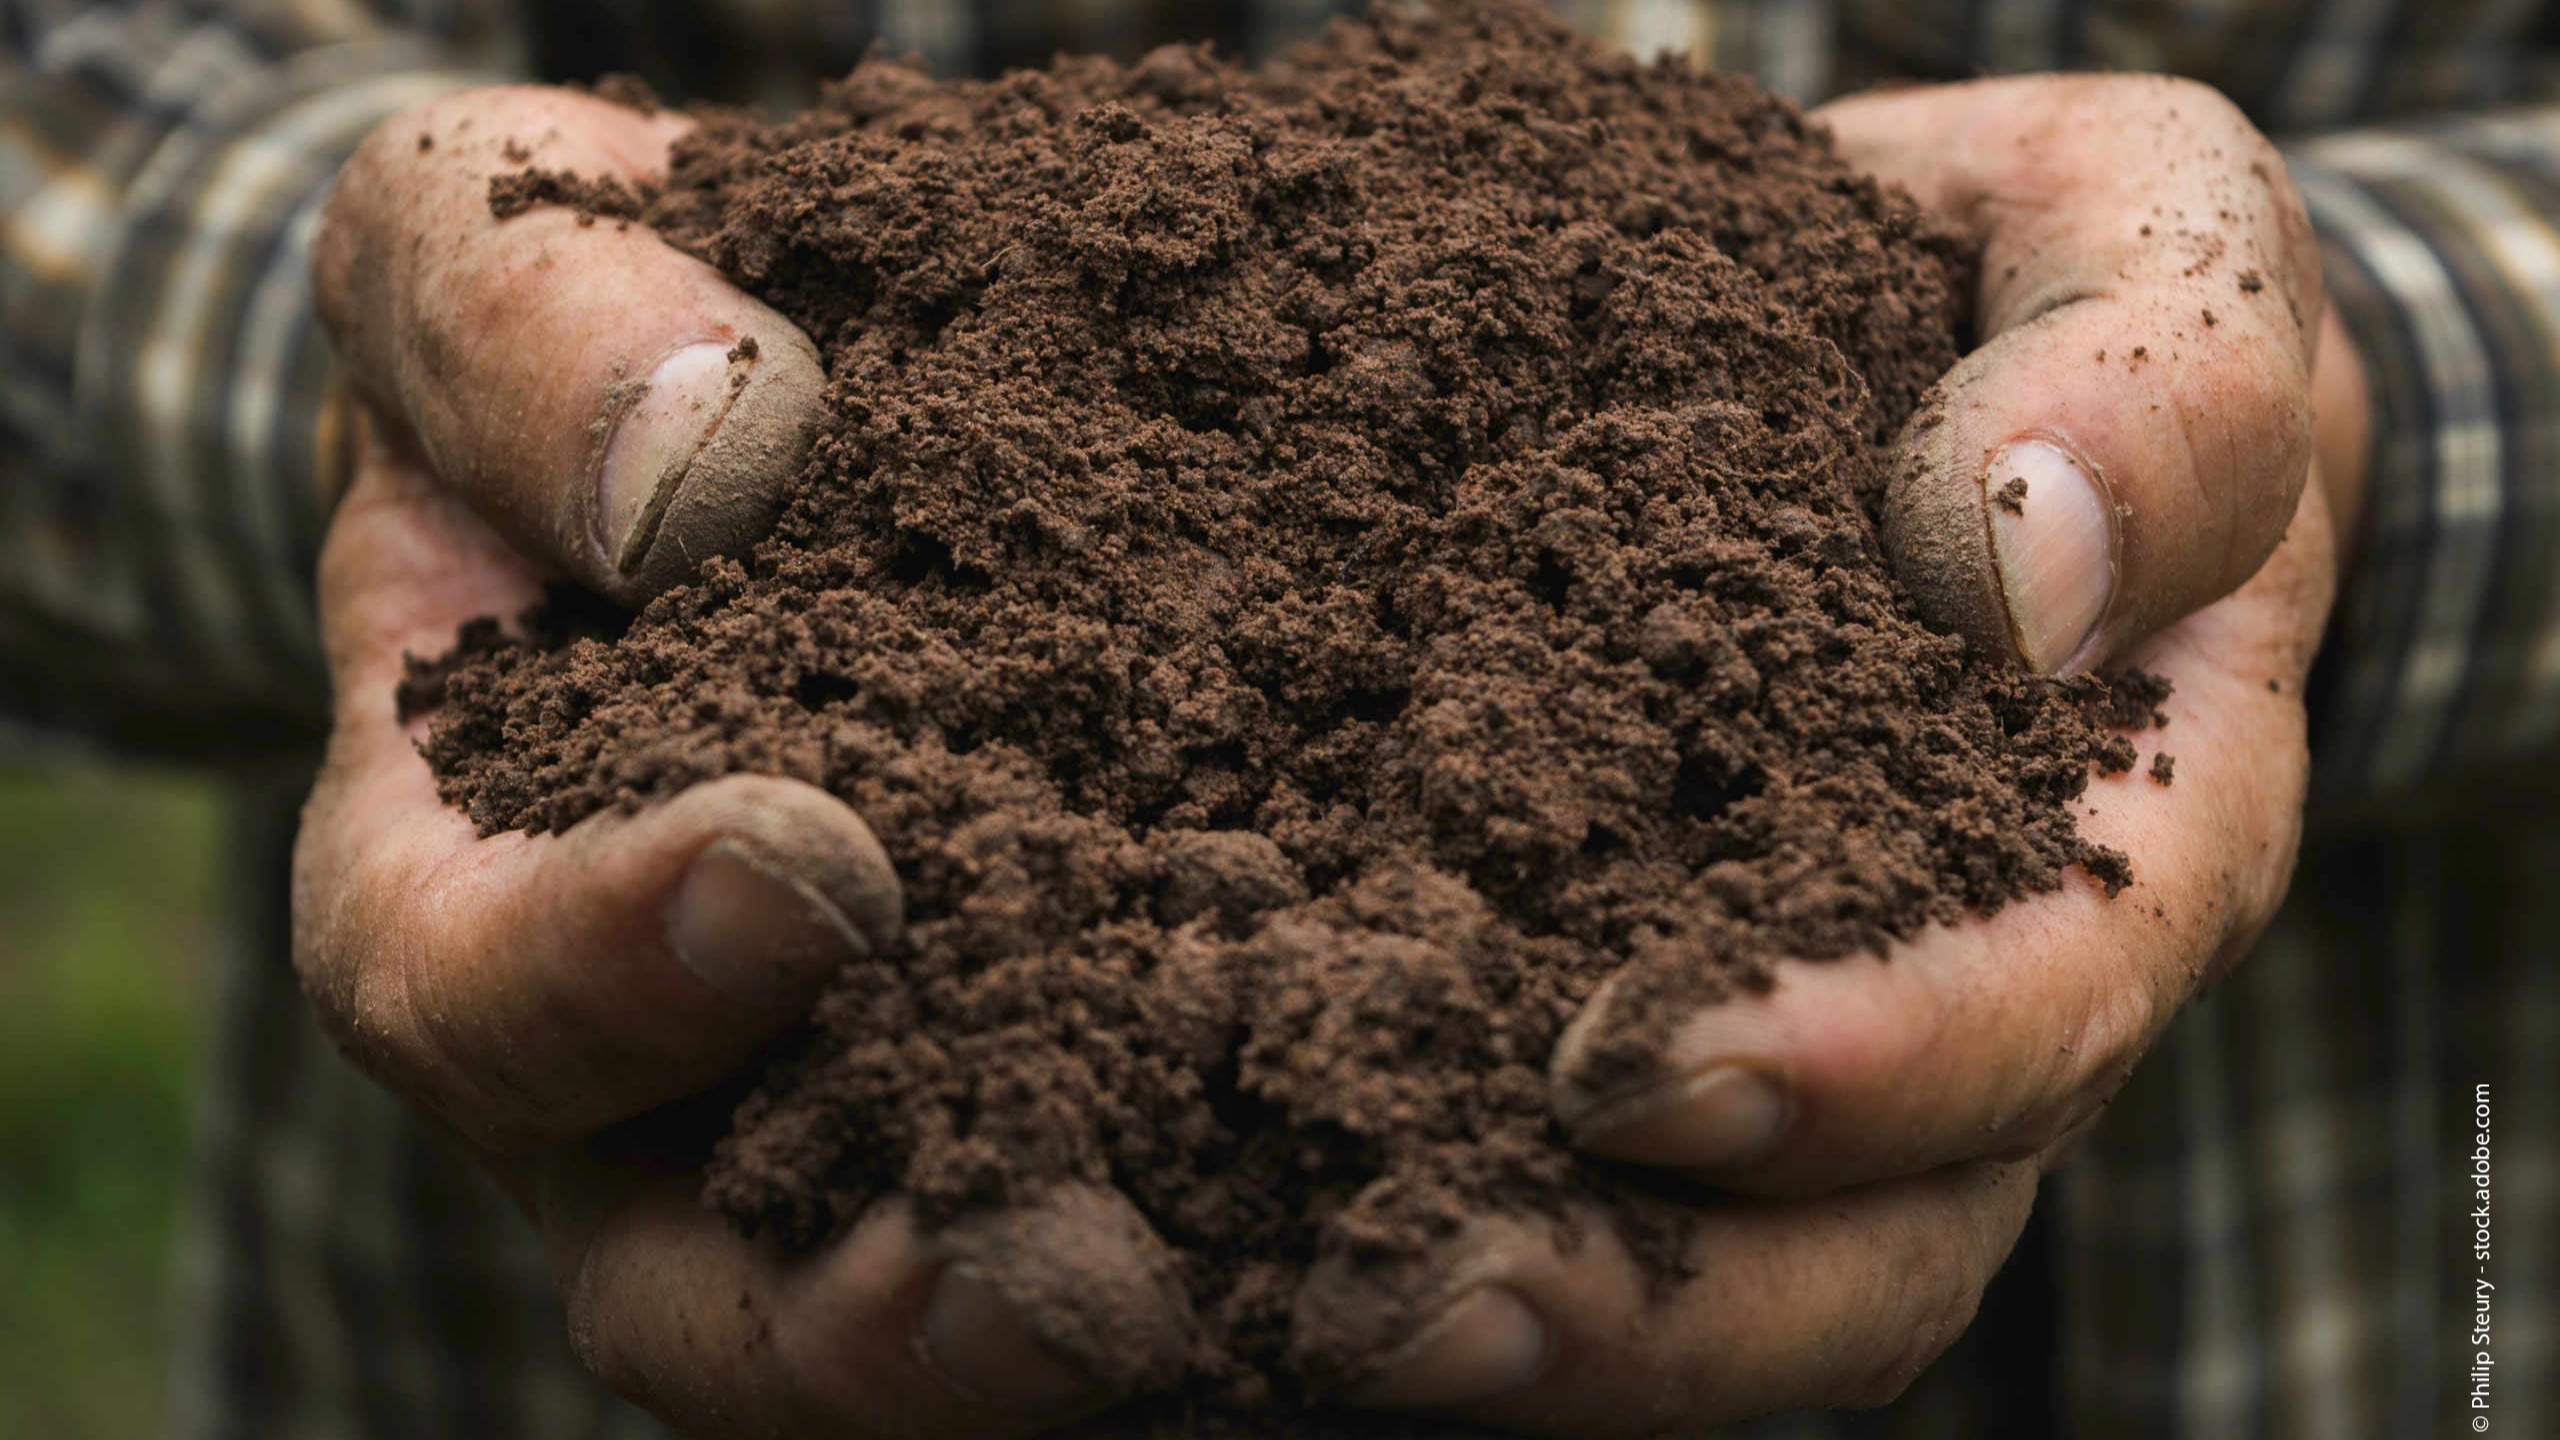 Social innovations to protect soils and empower people - new publications